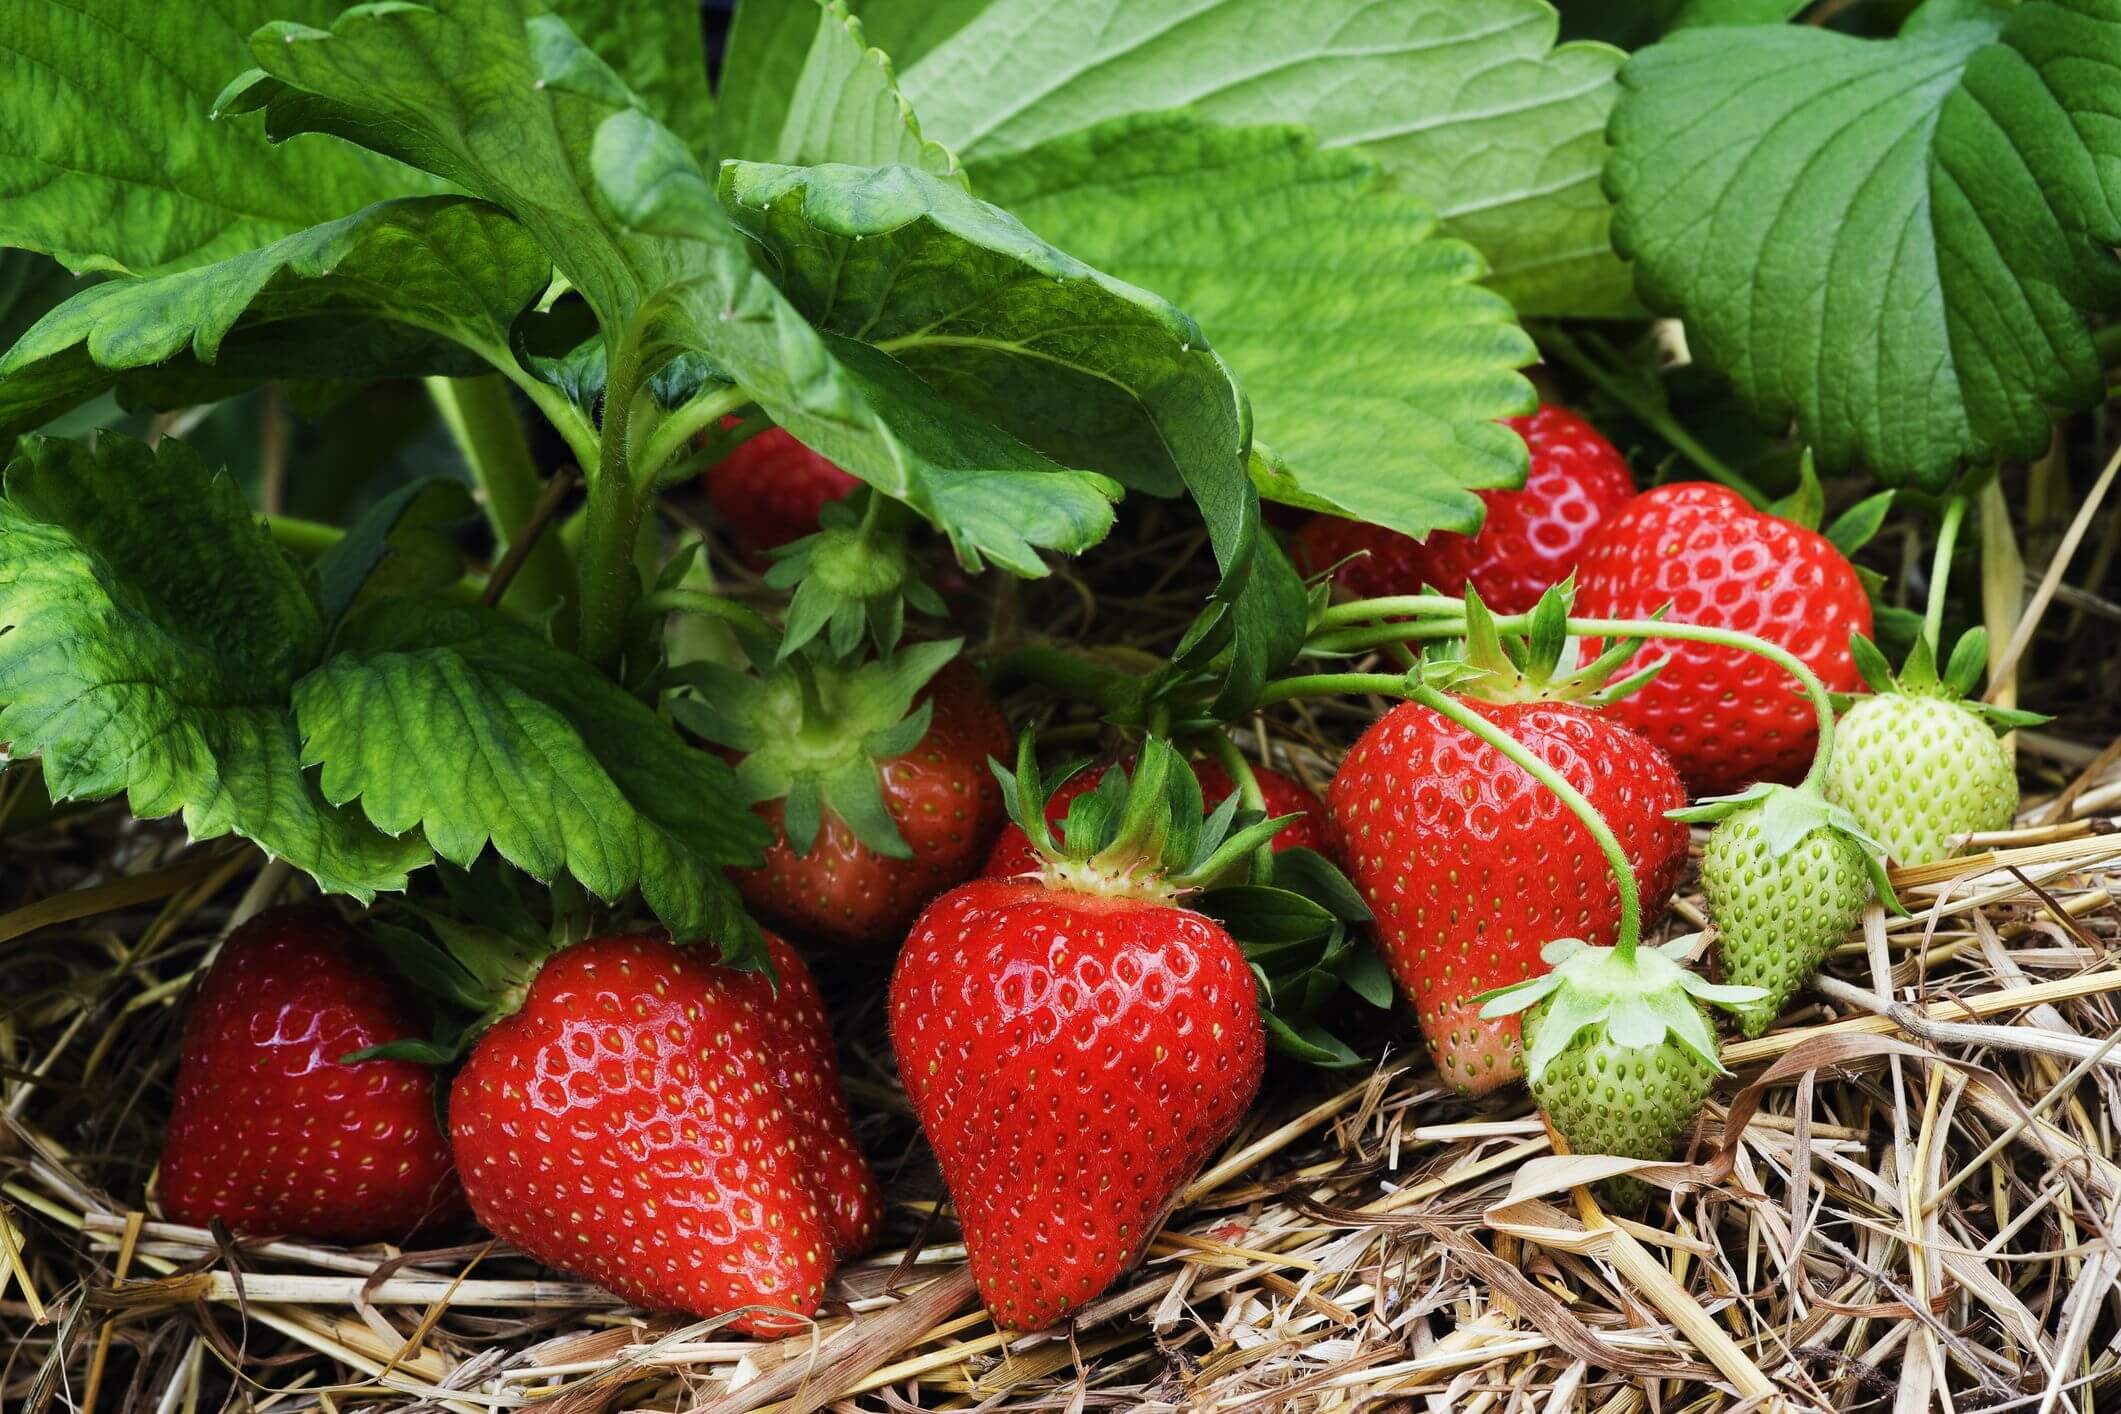 What are the signs of pests on strawberry plants